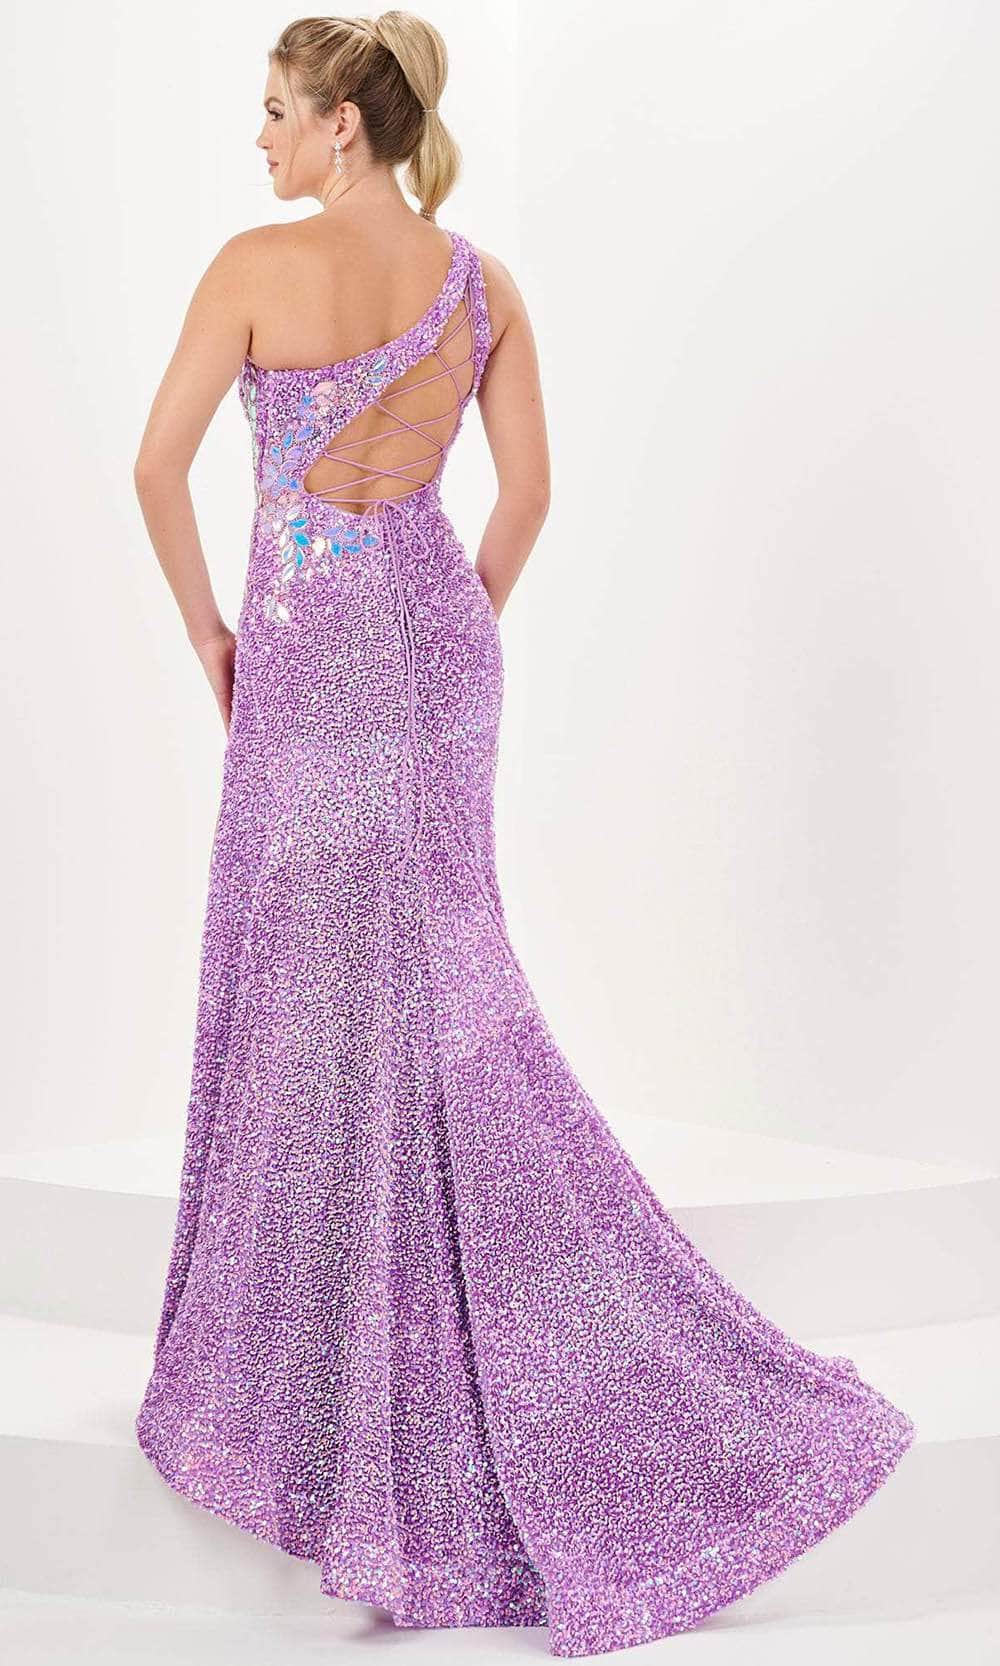 Tiffany Designs 16061 - One Shoulder Sequin Evening Gown Evening Dresses